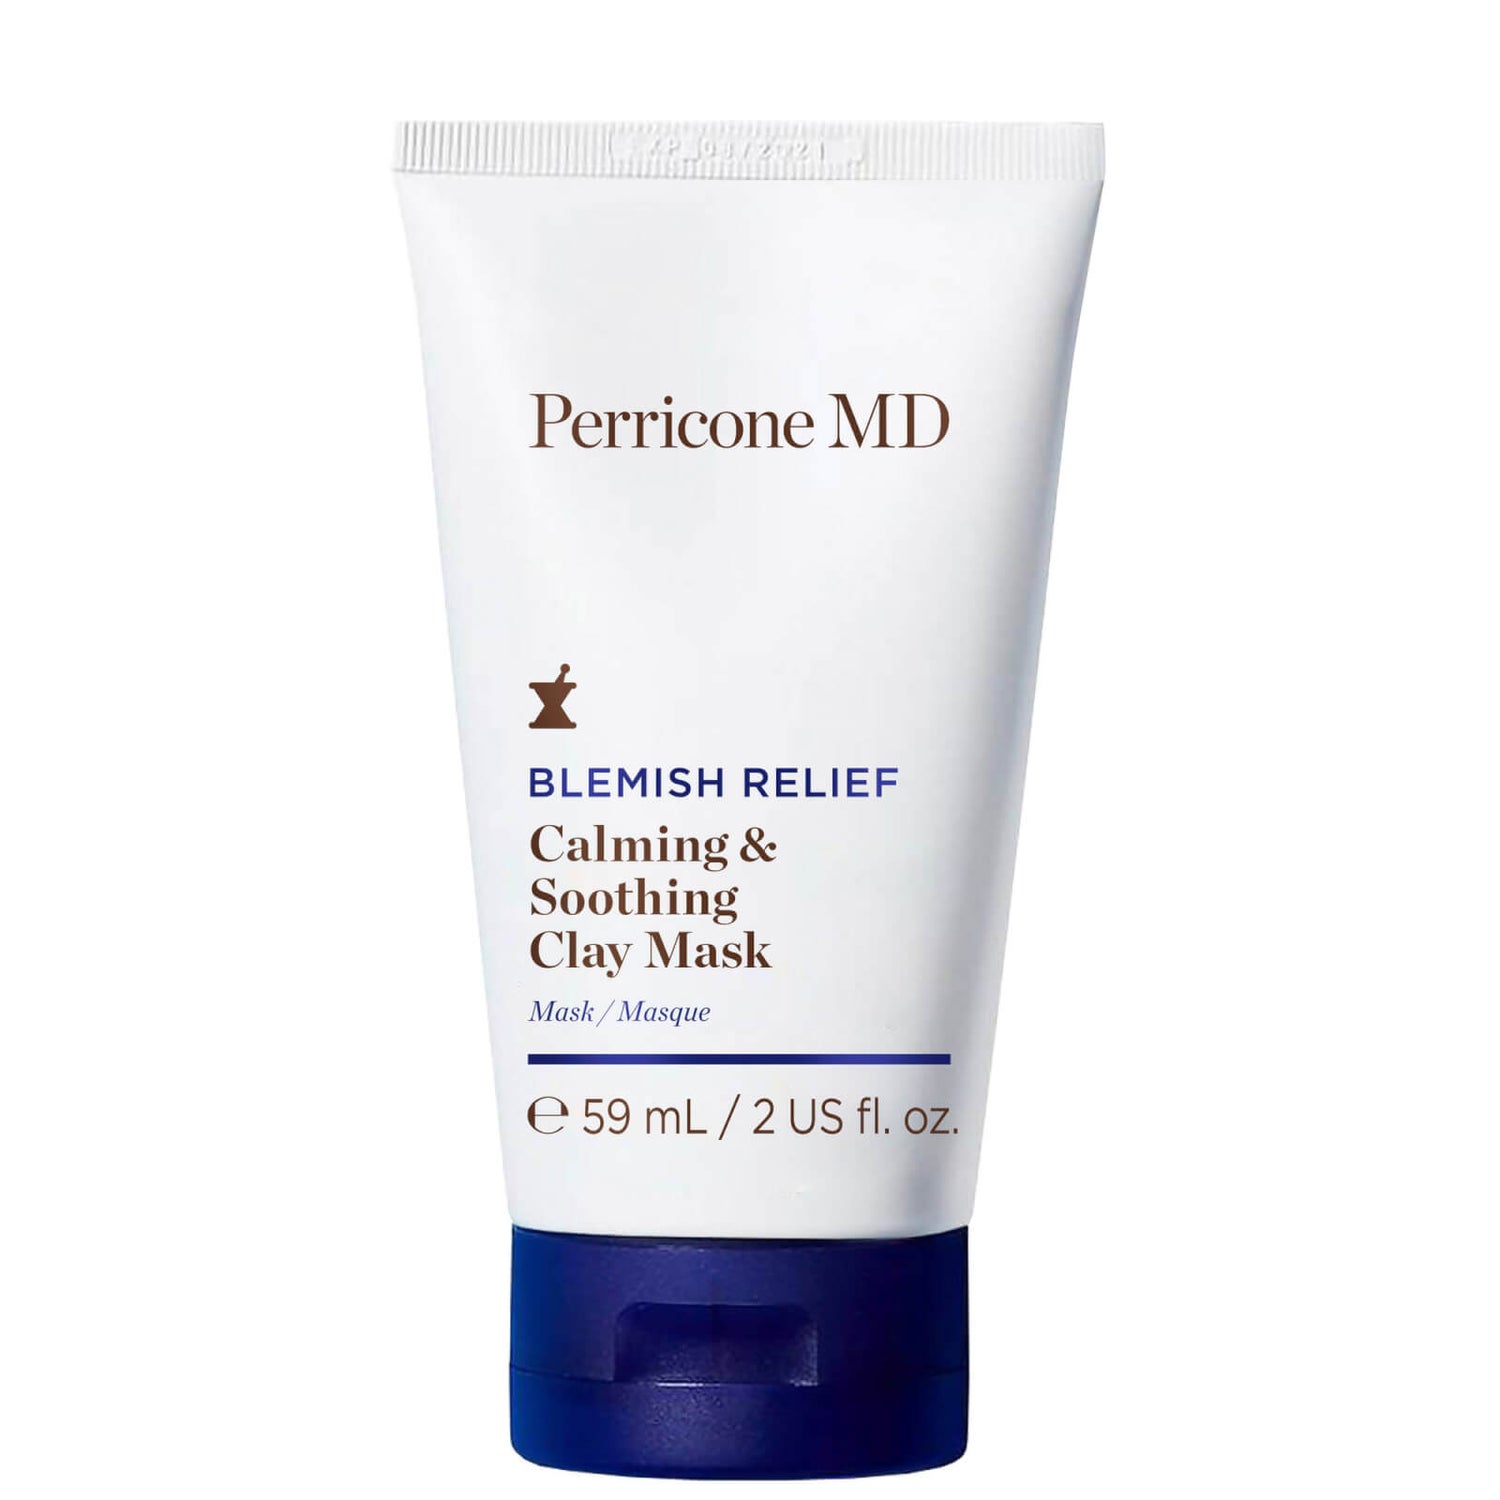 Blemish Relief Calming & Soothing Clay Mask